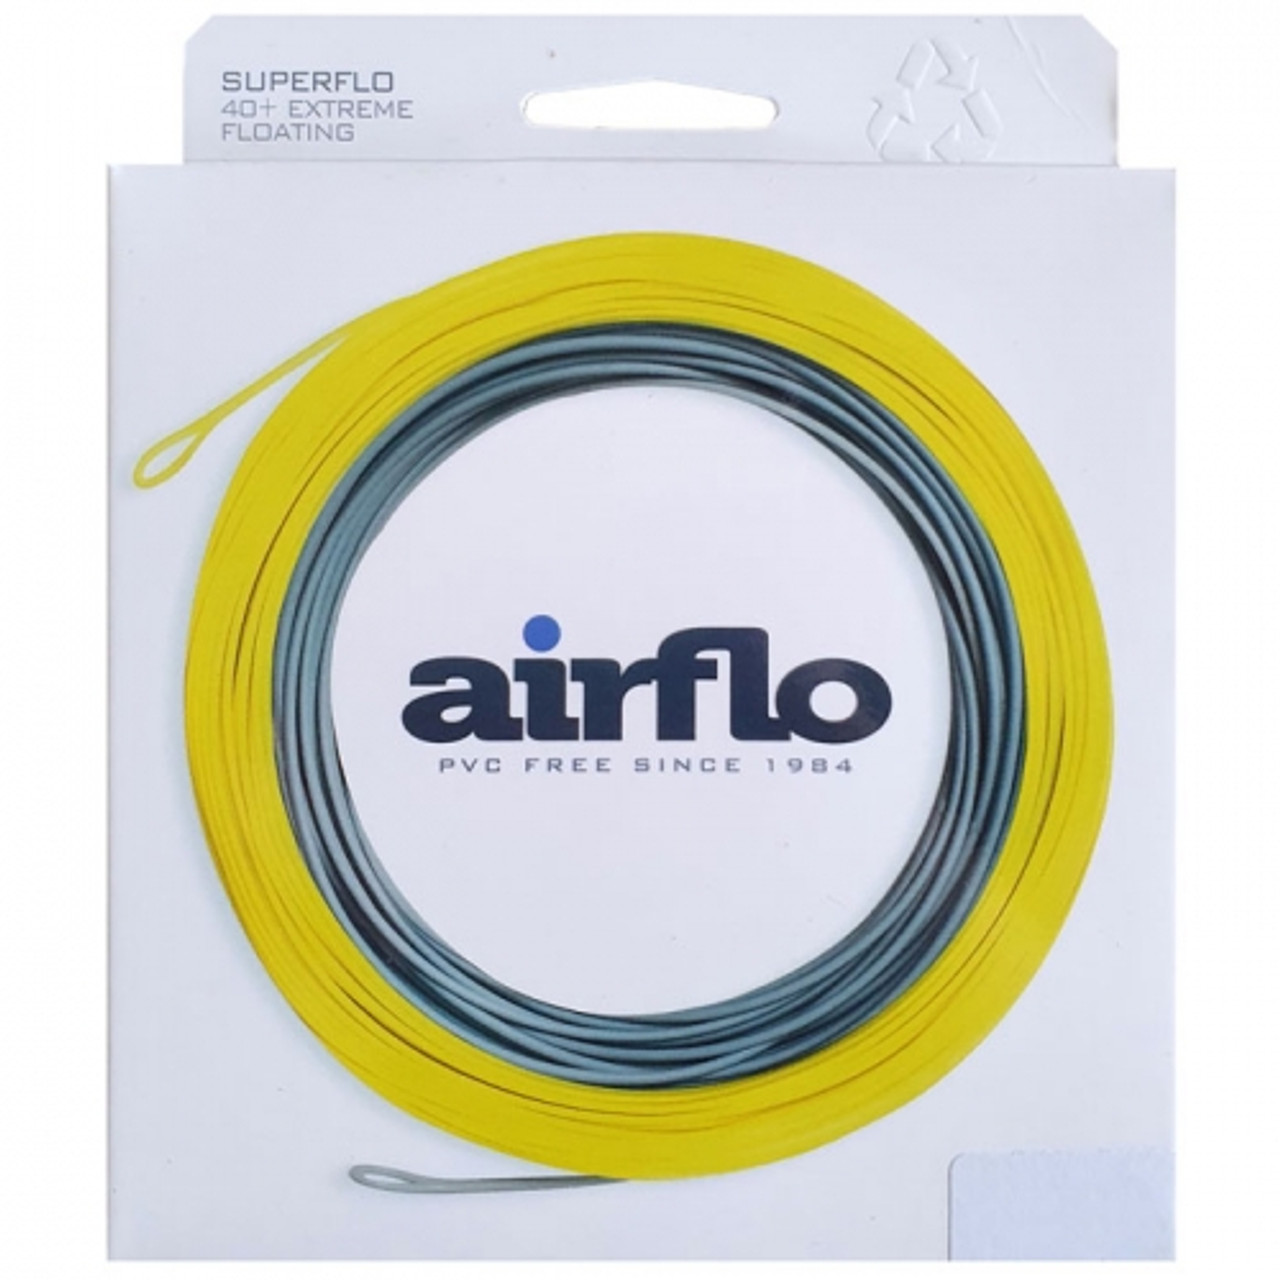 Airflo Superflo 40+ Extreme Floating Fly line - Keen's Tackle and Guns